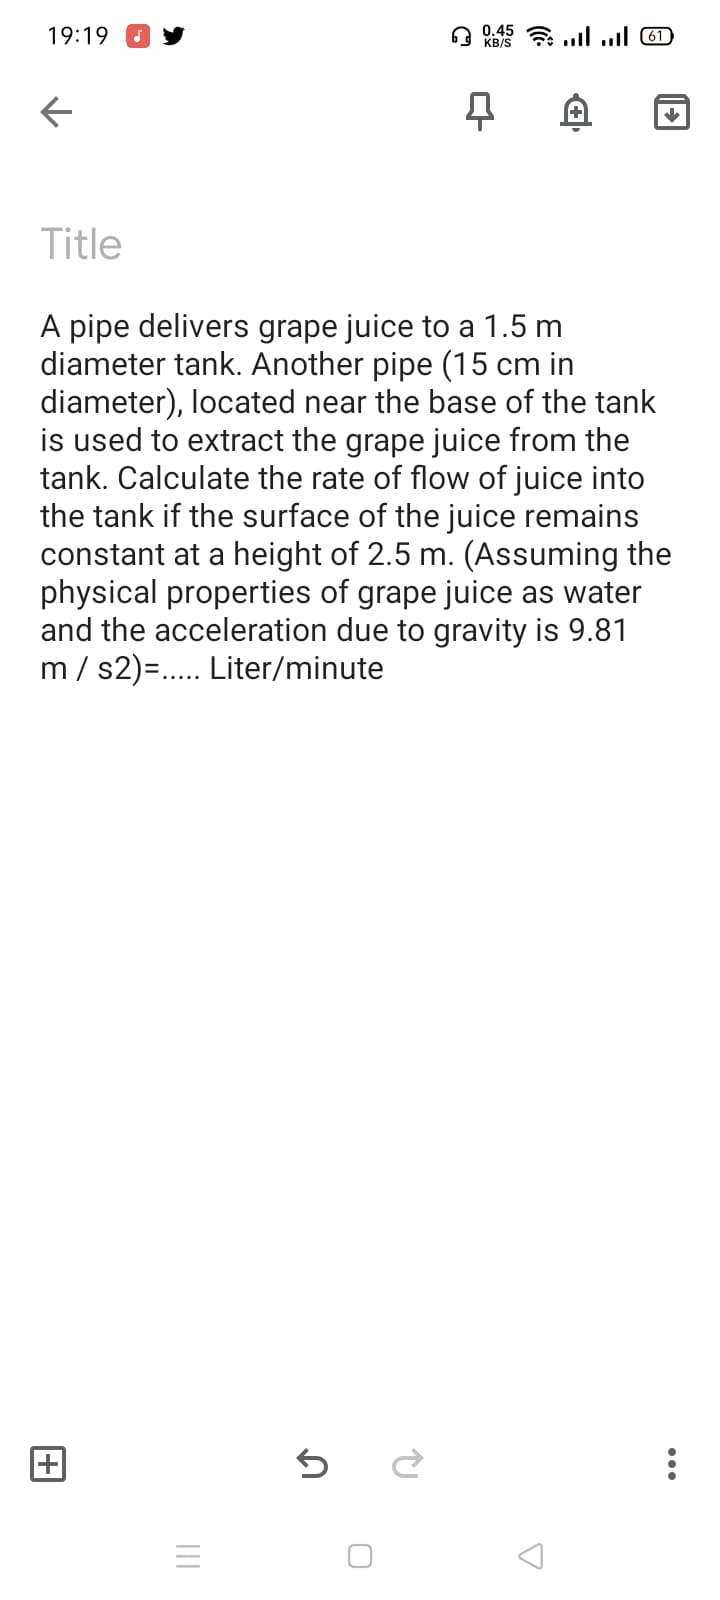 19:19
0.45
KB/S
7 ll l 61)
Title
A pipe delivers grape juice to a 1.5 m
diameter tank. Another pipe (15 cm in
diameter), located near the base of the tank
is used to extract the grape juice from the
tank. Calculate the rate of flow of juice into
the tank if the surface of the juice remains
constant at a height of 2.5 m. (Assuming the
physical properties of grape juice as water
and the acceleration due to gravity is 9.81
m / s2)=.. Liter/minute
II
+
